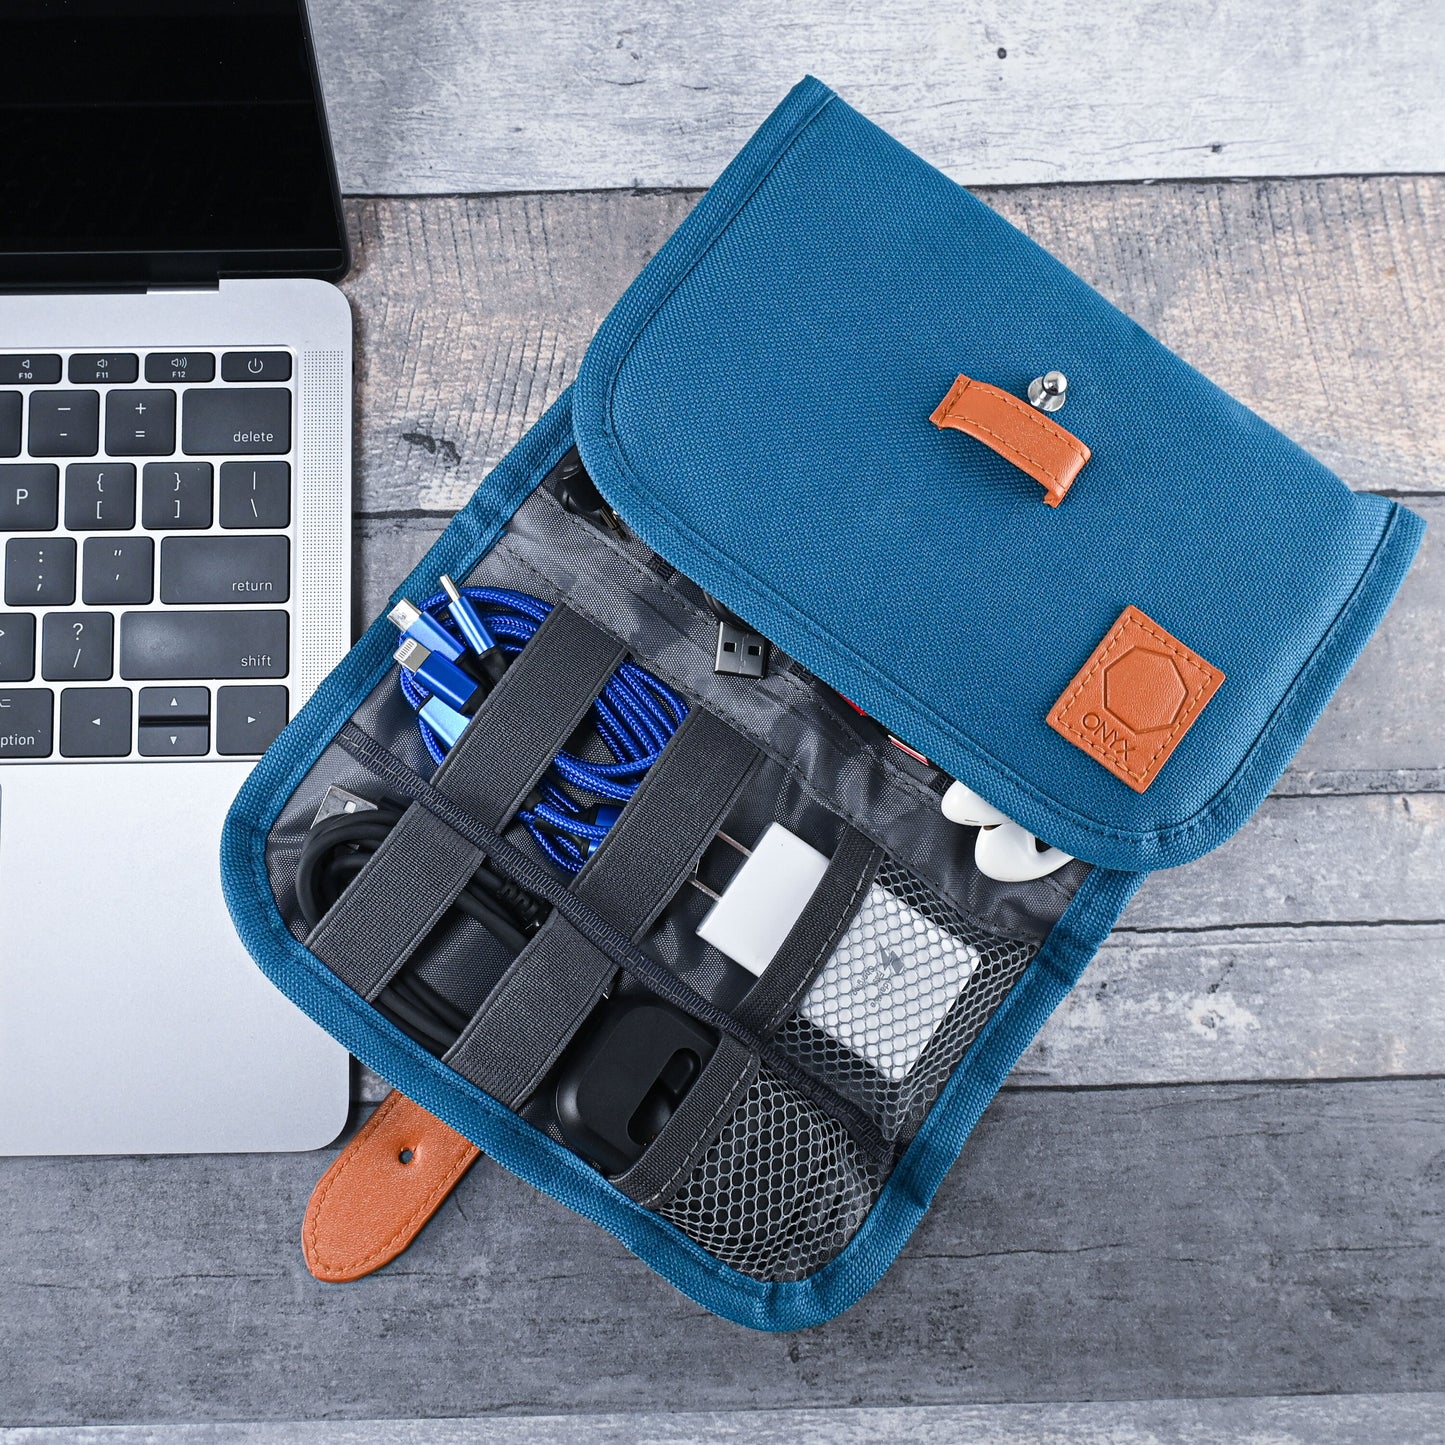 Blue Electronics Organizer Bag – Portable Travel Accessories Case for Chargers, Cords, Cables, Batteries and Womens Toiletry Bag